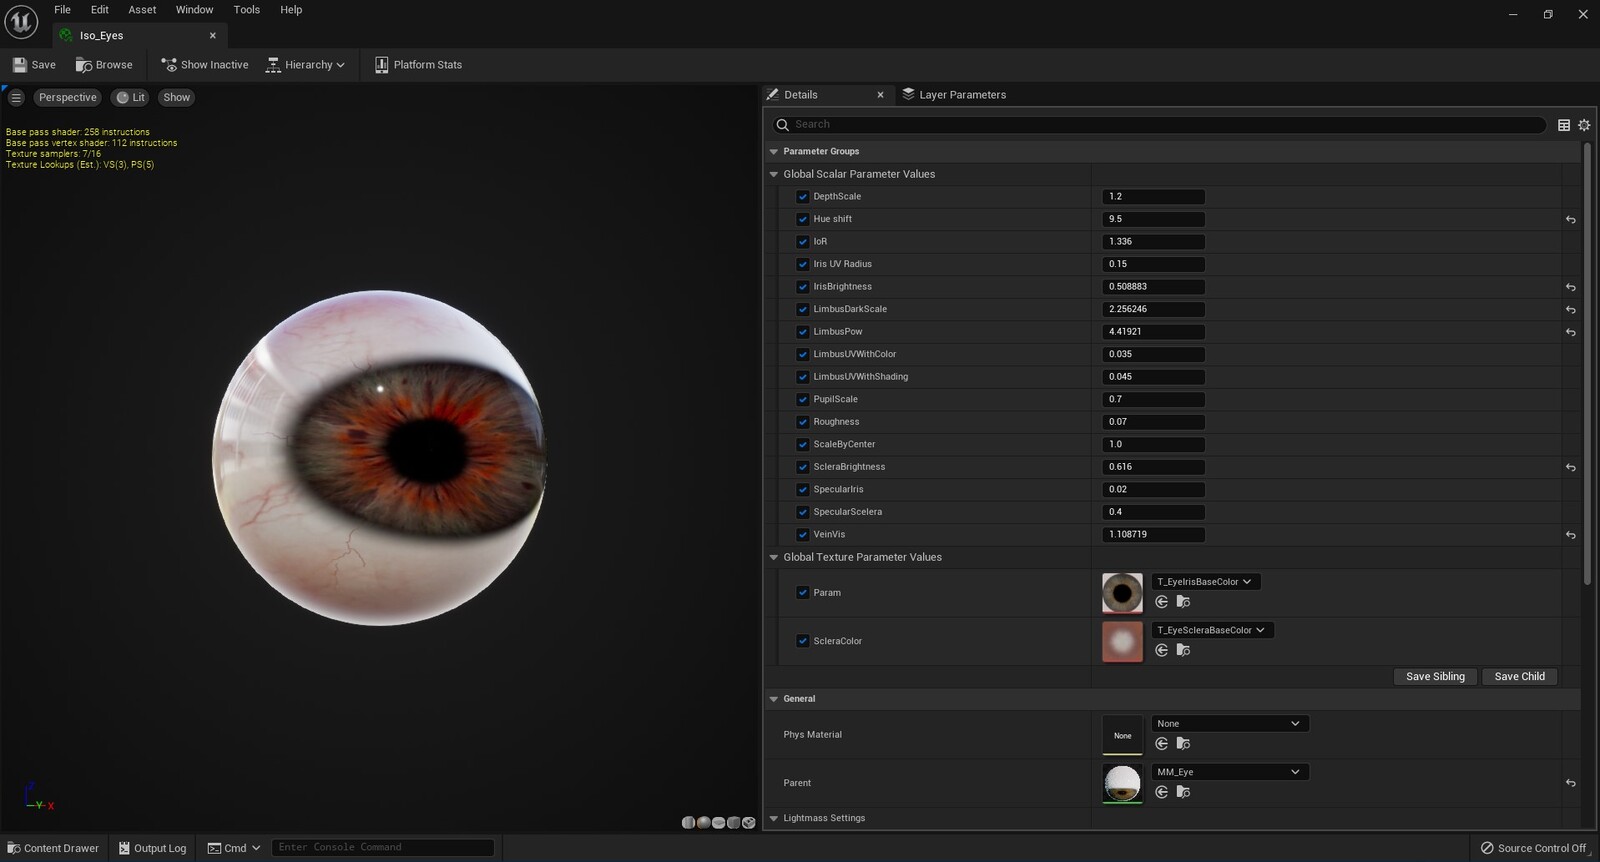 Procedural Eye shader made by Spencer Wang. Creating eyes is tricky in UE5 so for this time I wanted something quick and I found this procedural eye by Spencer Wang that I can also learn from. 